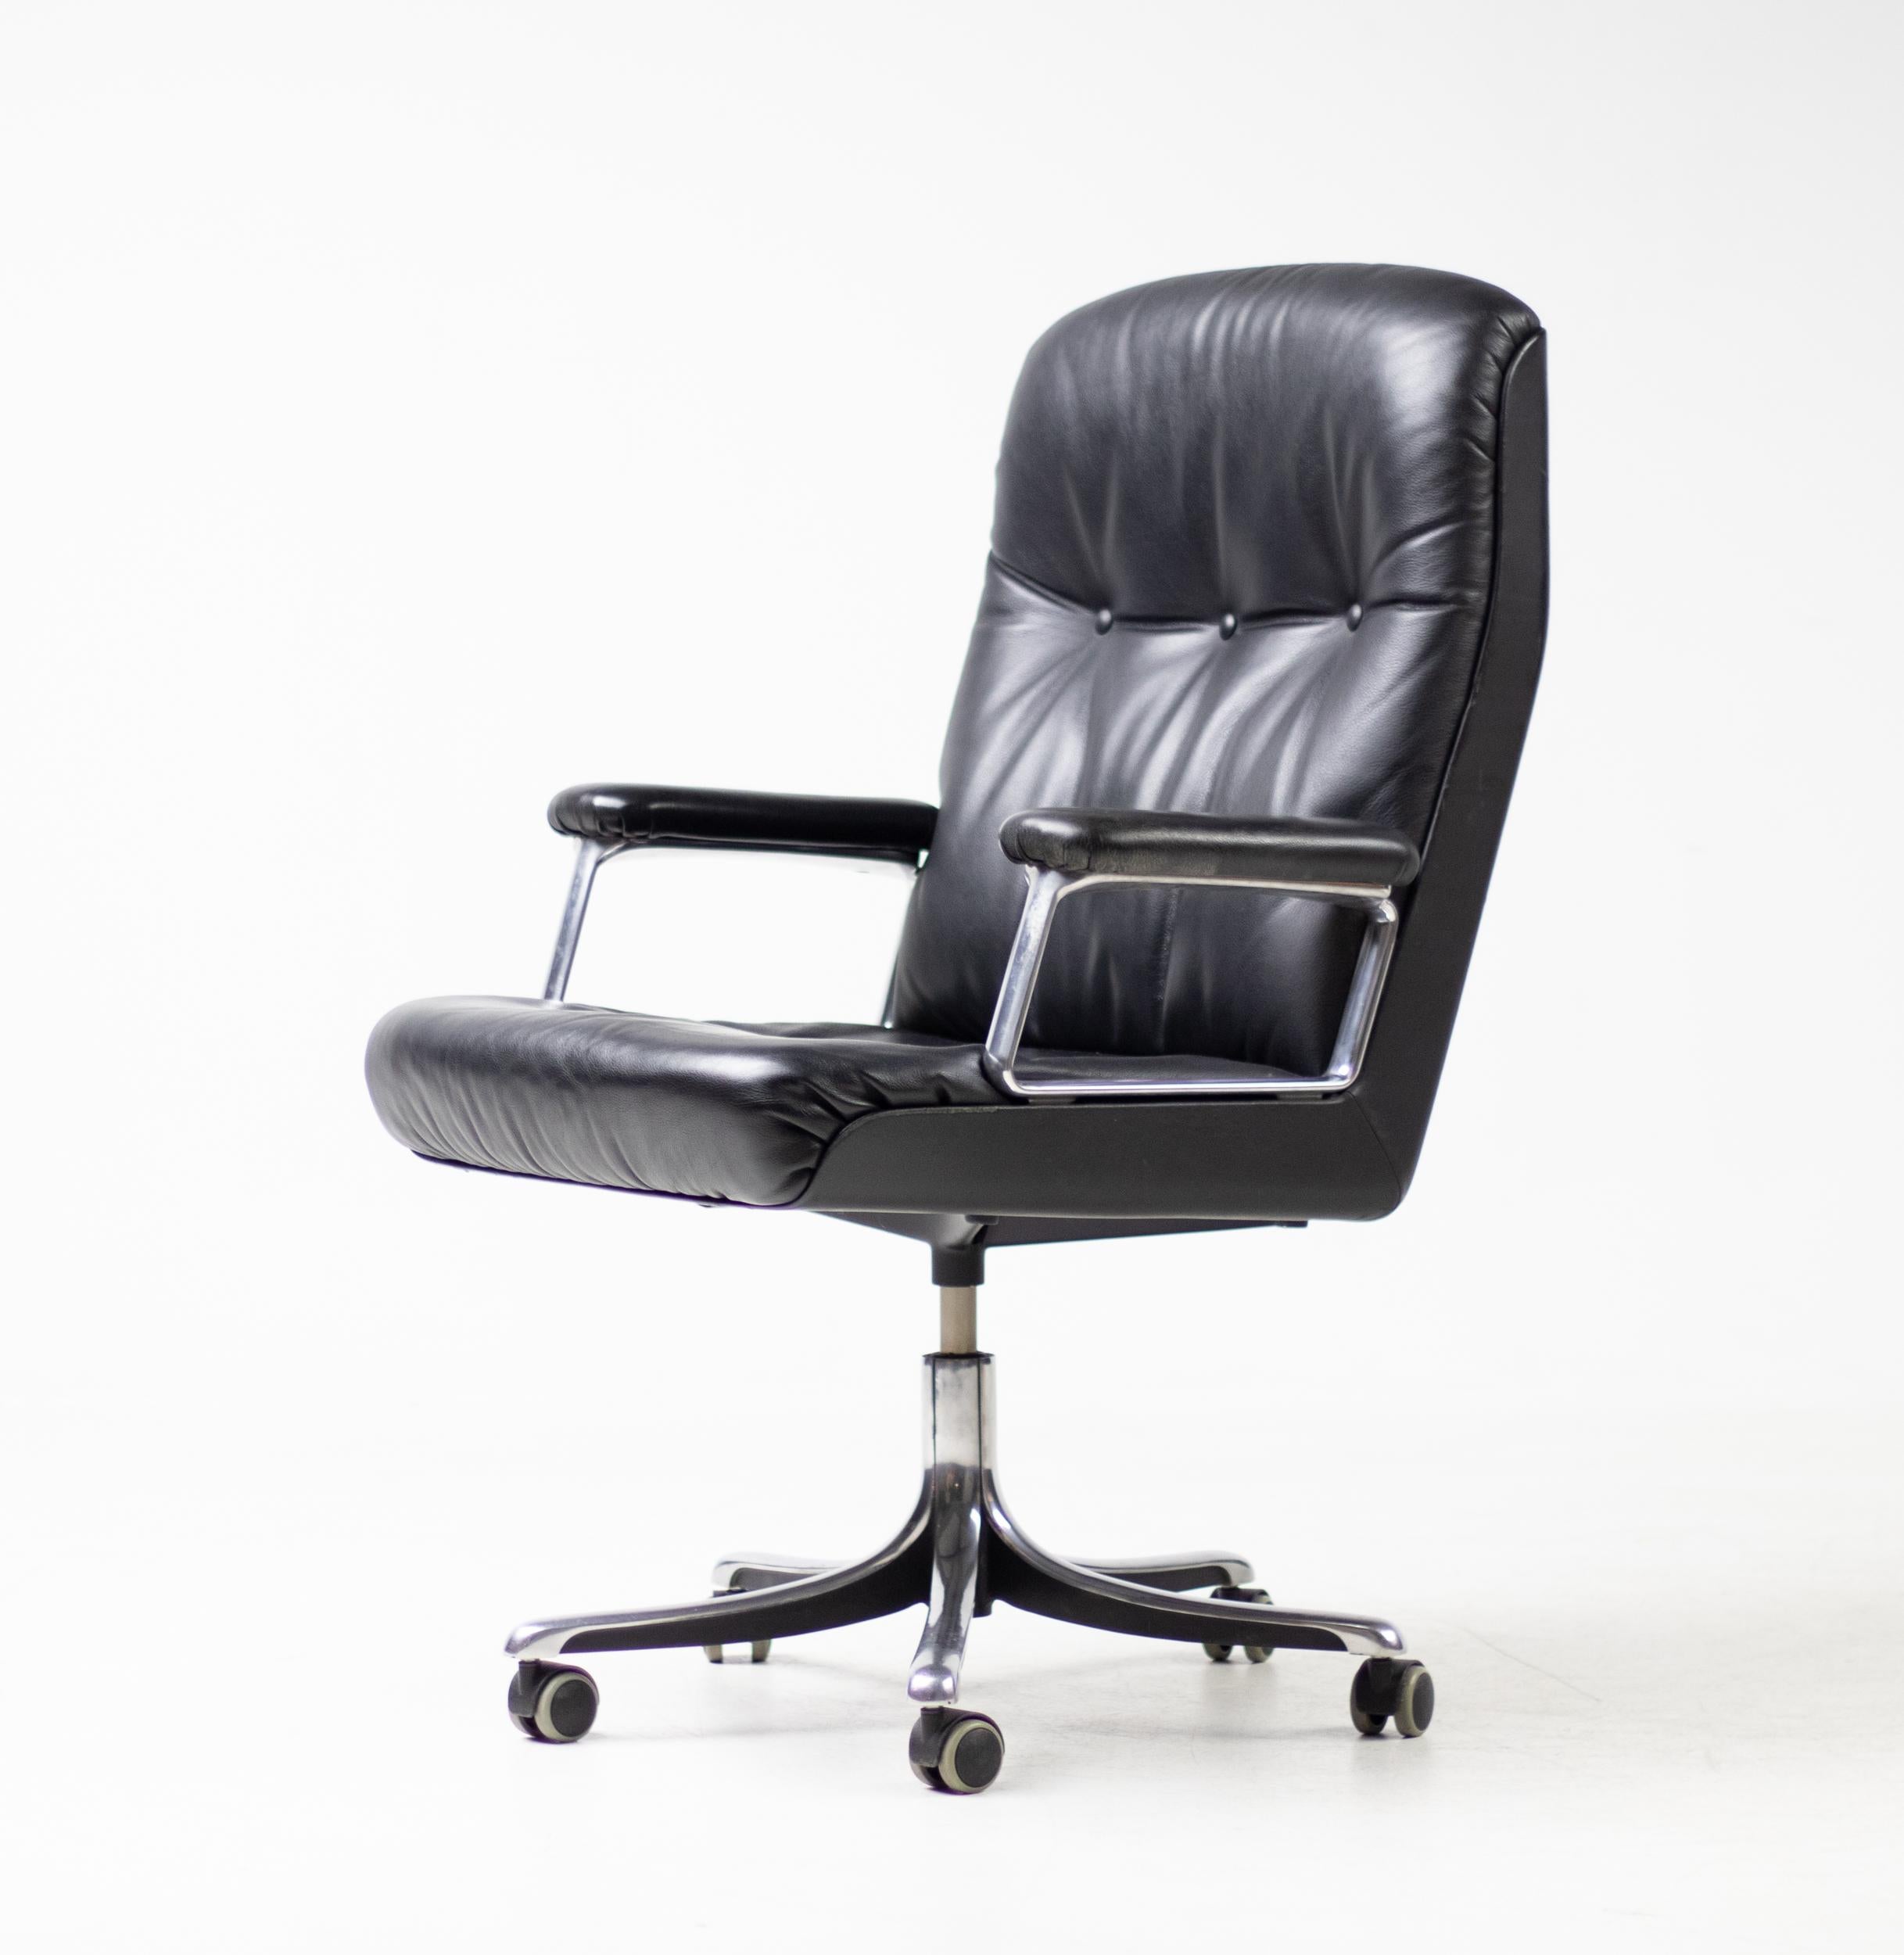 Desk or office chair in tufted black leather with arms and base of polished aluminum, designed by Osvaldo Borsani for Tecno.
Very nice original vintage condition.